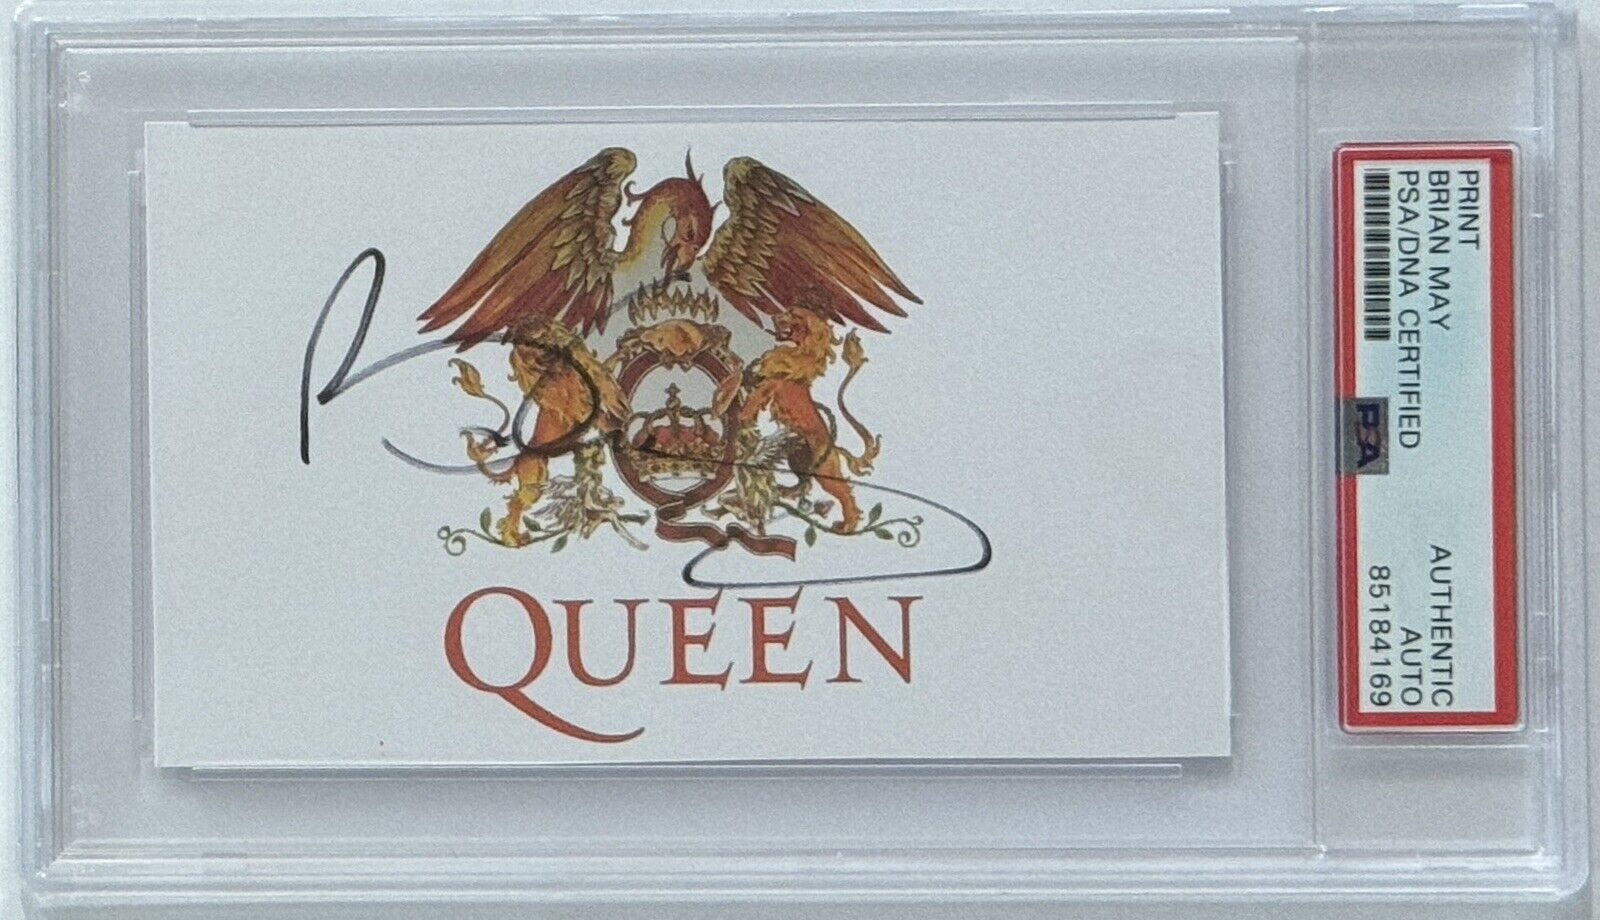 Brian May SIGNED QUEEN Logo Guitar Player PSA DNA COA Certified Autograph Card